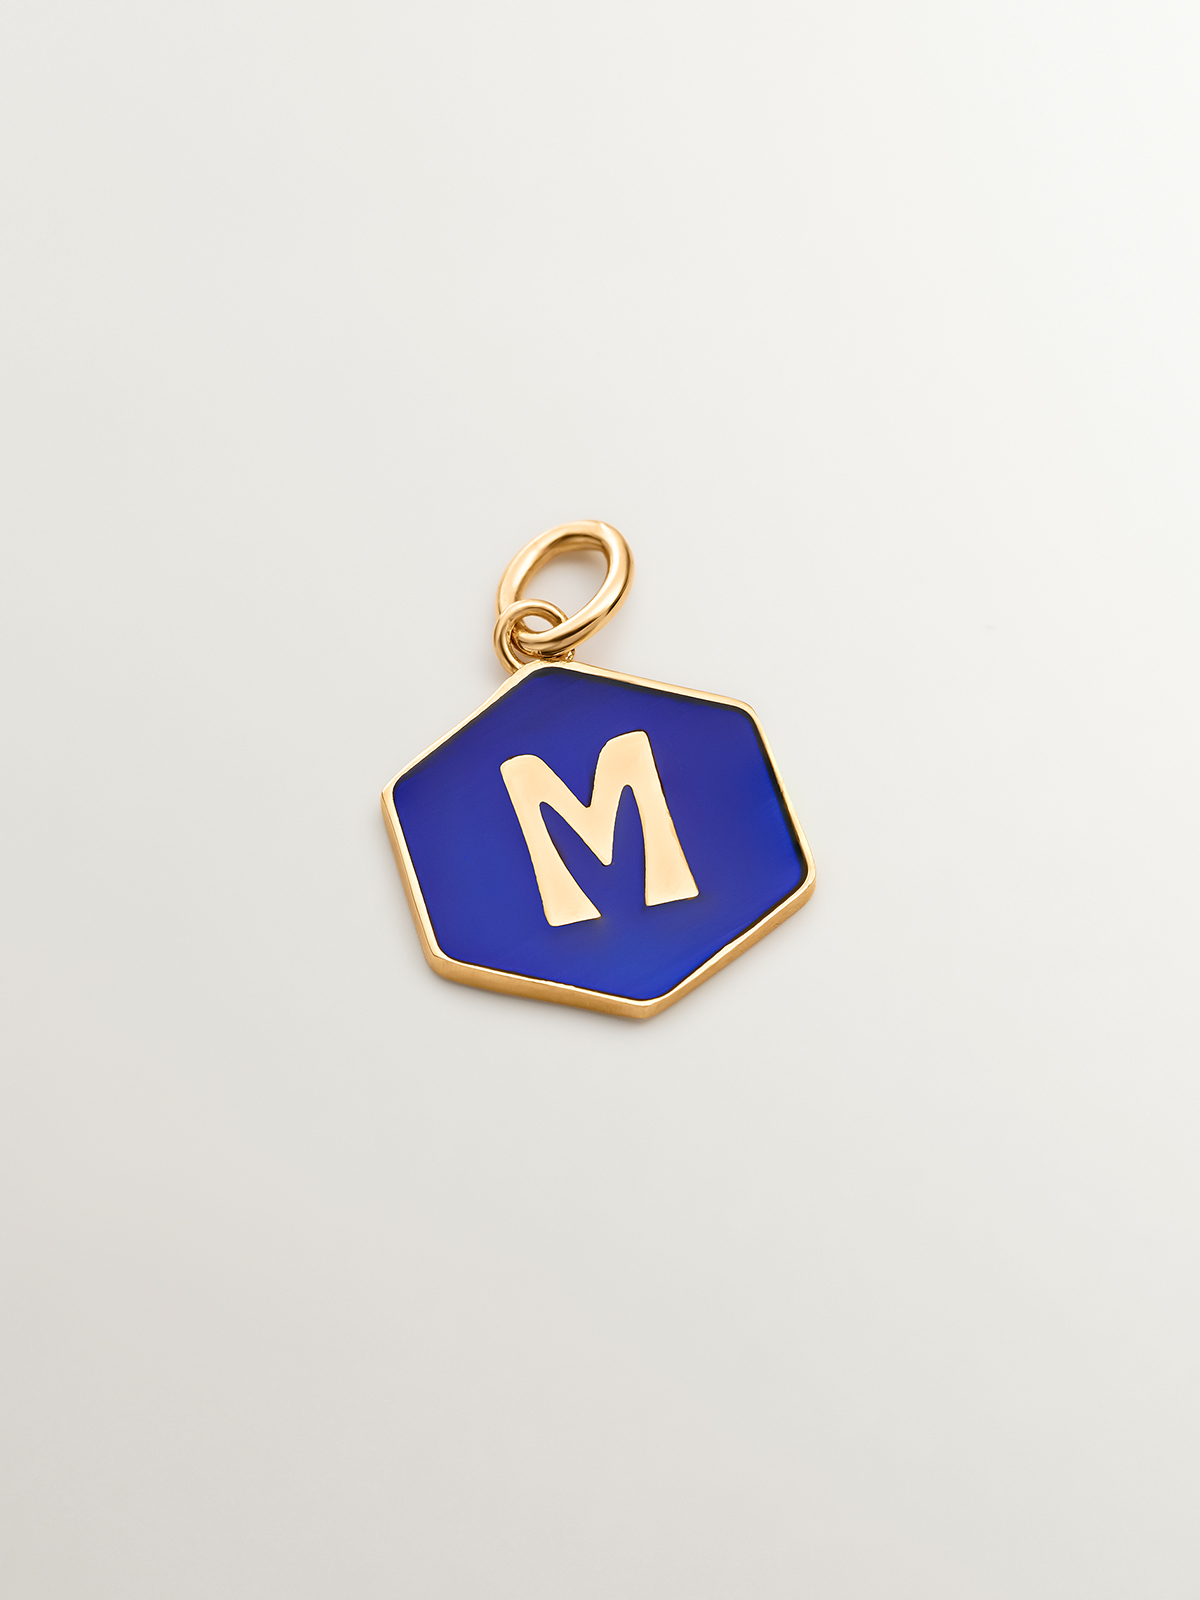 18K yellow gold plated 925 sterling silver charm with M initial and blue enamel with hexagonal shape